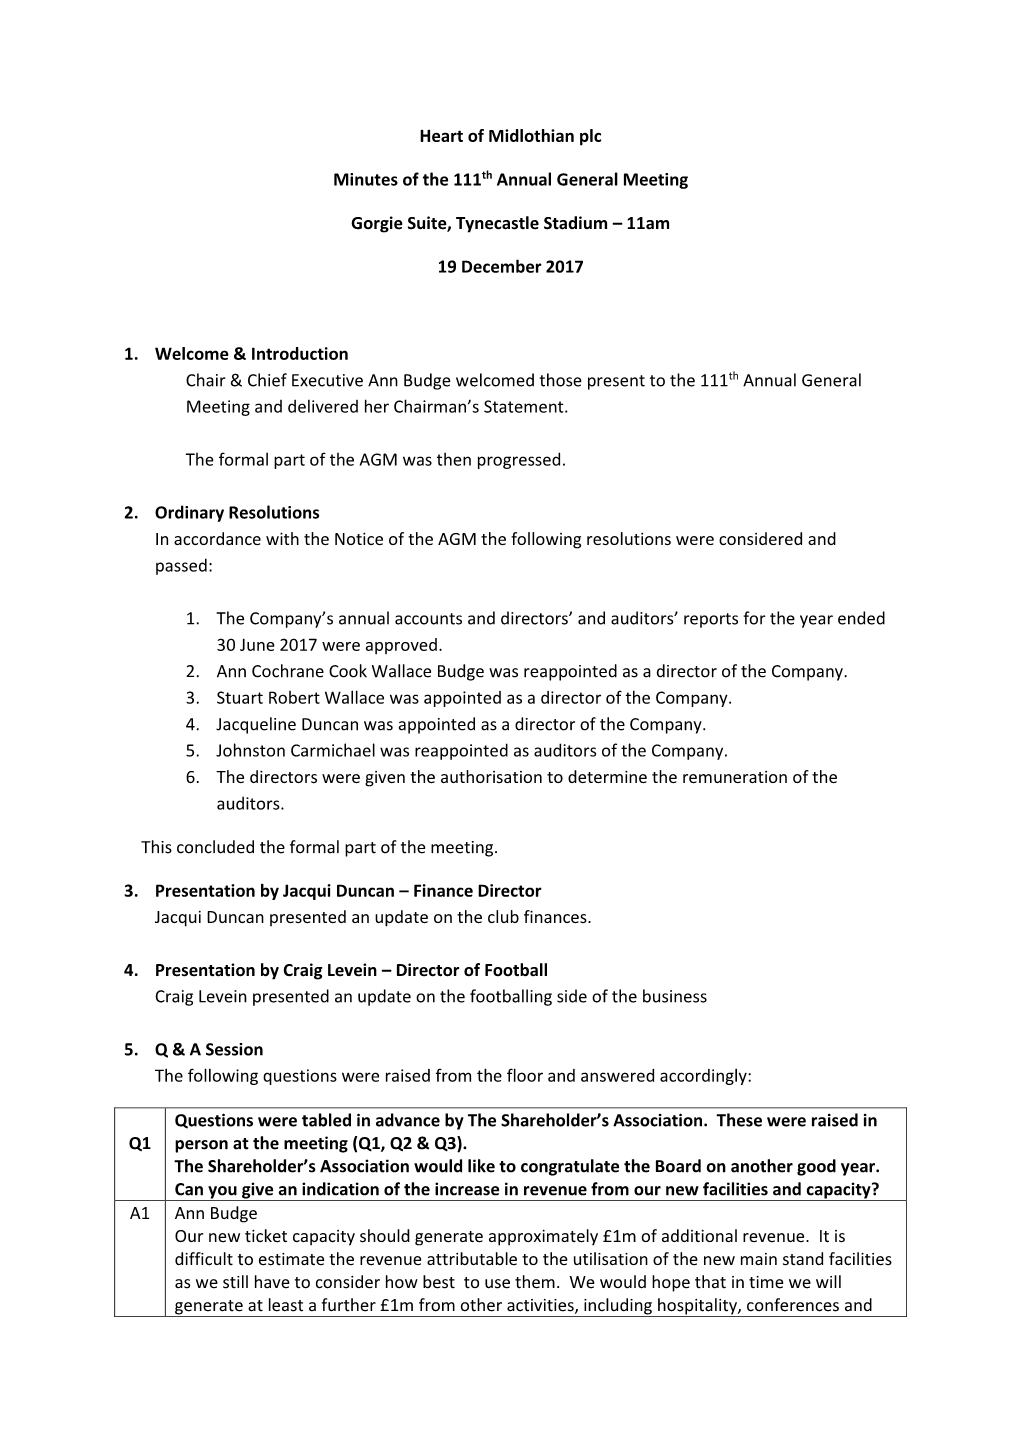 Heart of Midlothian Plc Minutes of the 111Th Annual General Meeting